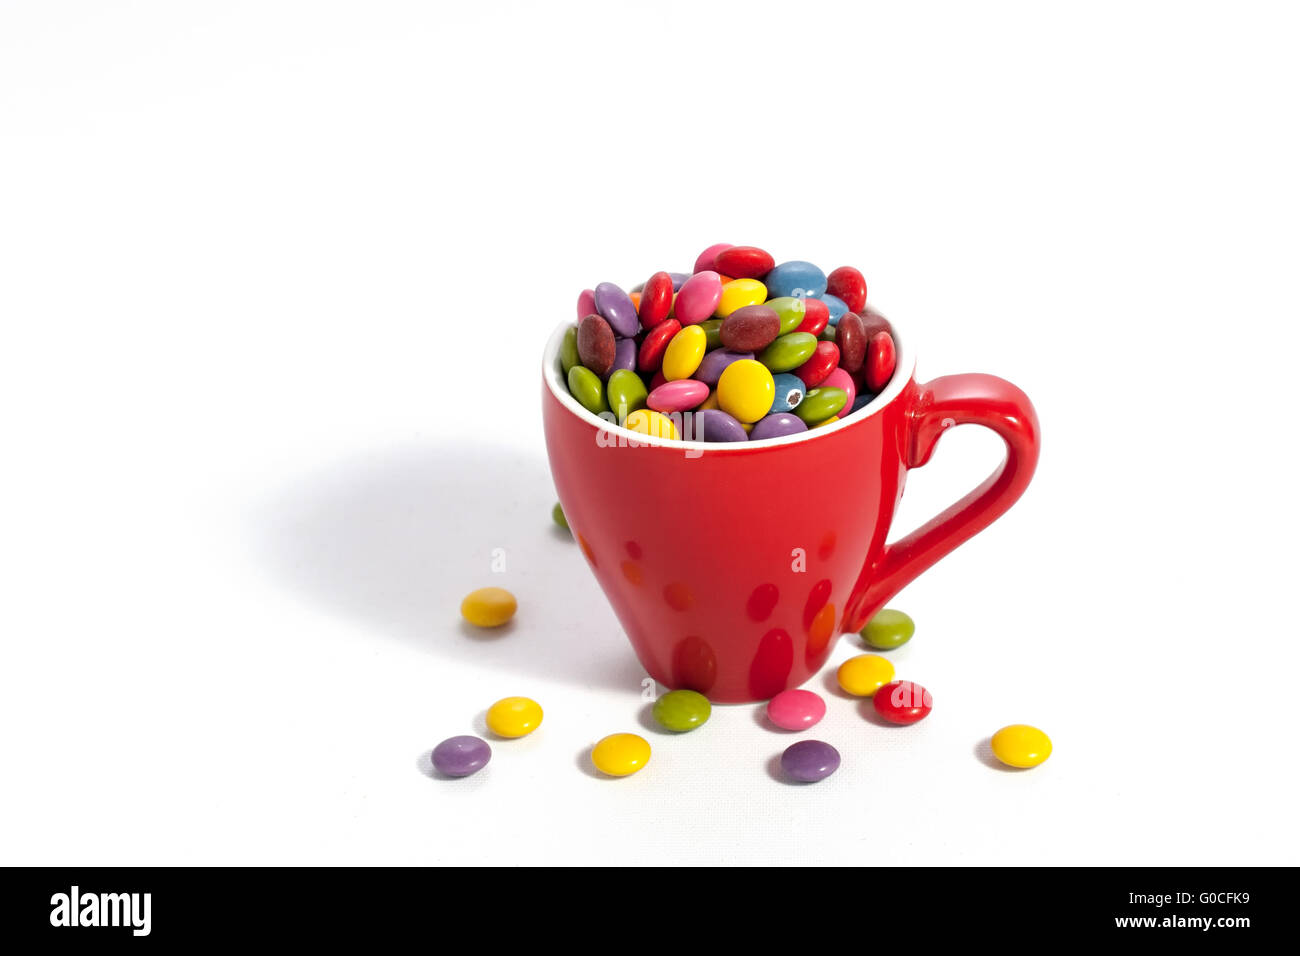 Colorful dragees in small red colored cup on white Stock Photo